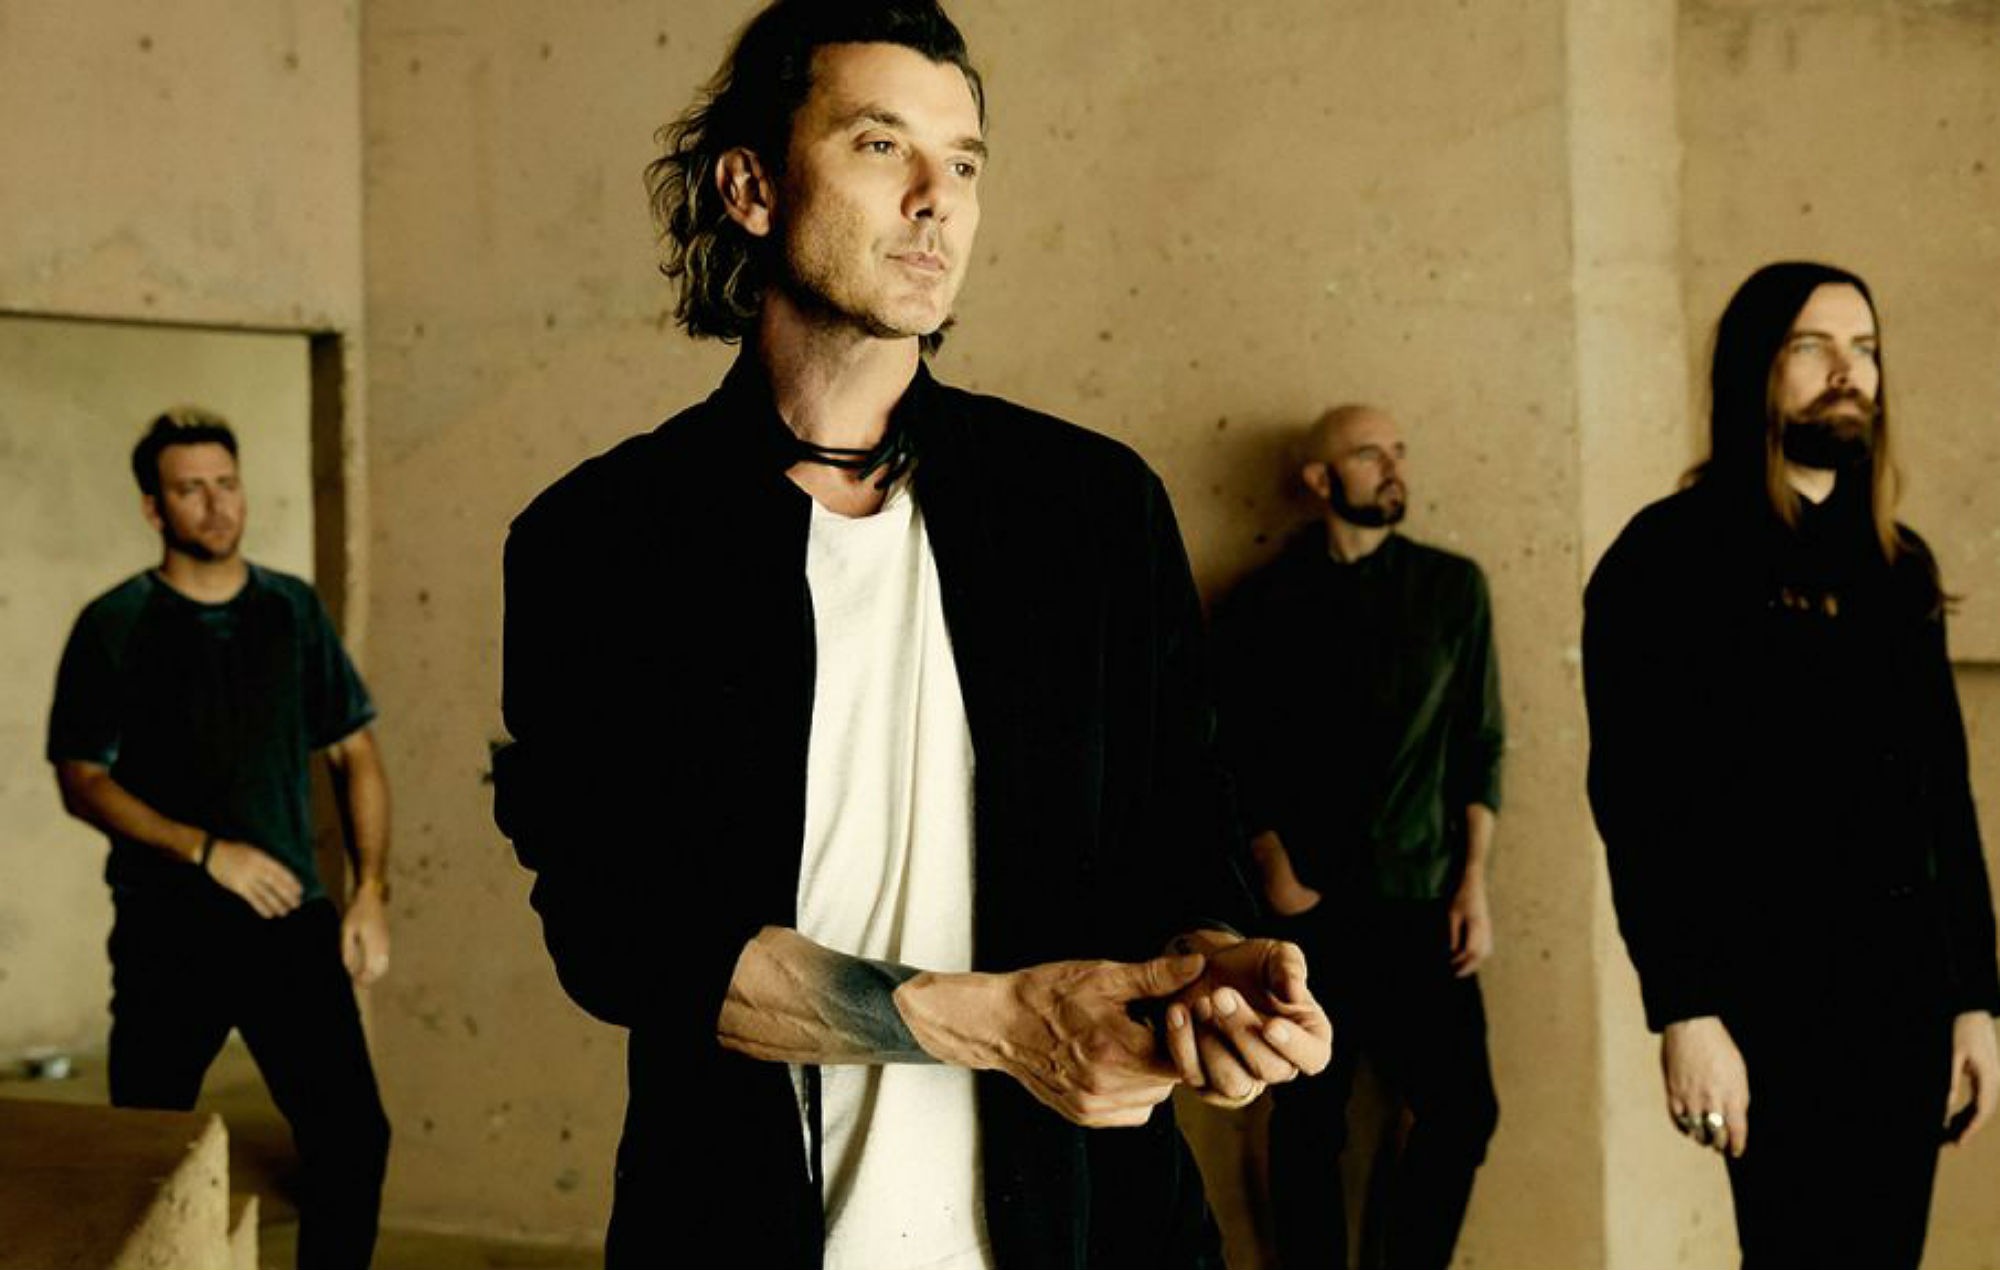 Gavin Rossdale on Bush’s new album ‘The Kingdom’, catching flak in the ’90s, and the “experiment” of being on ‘The Voice’